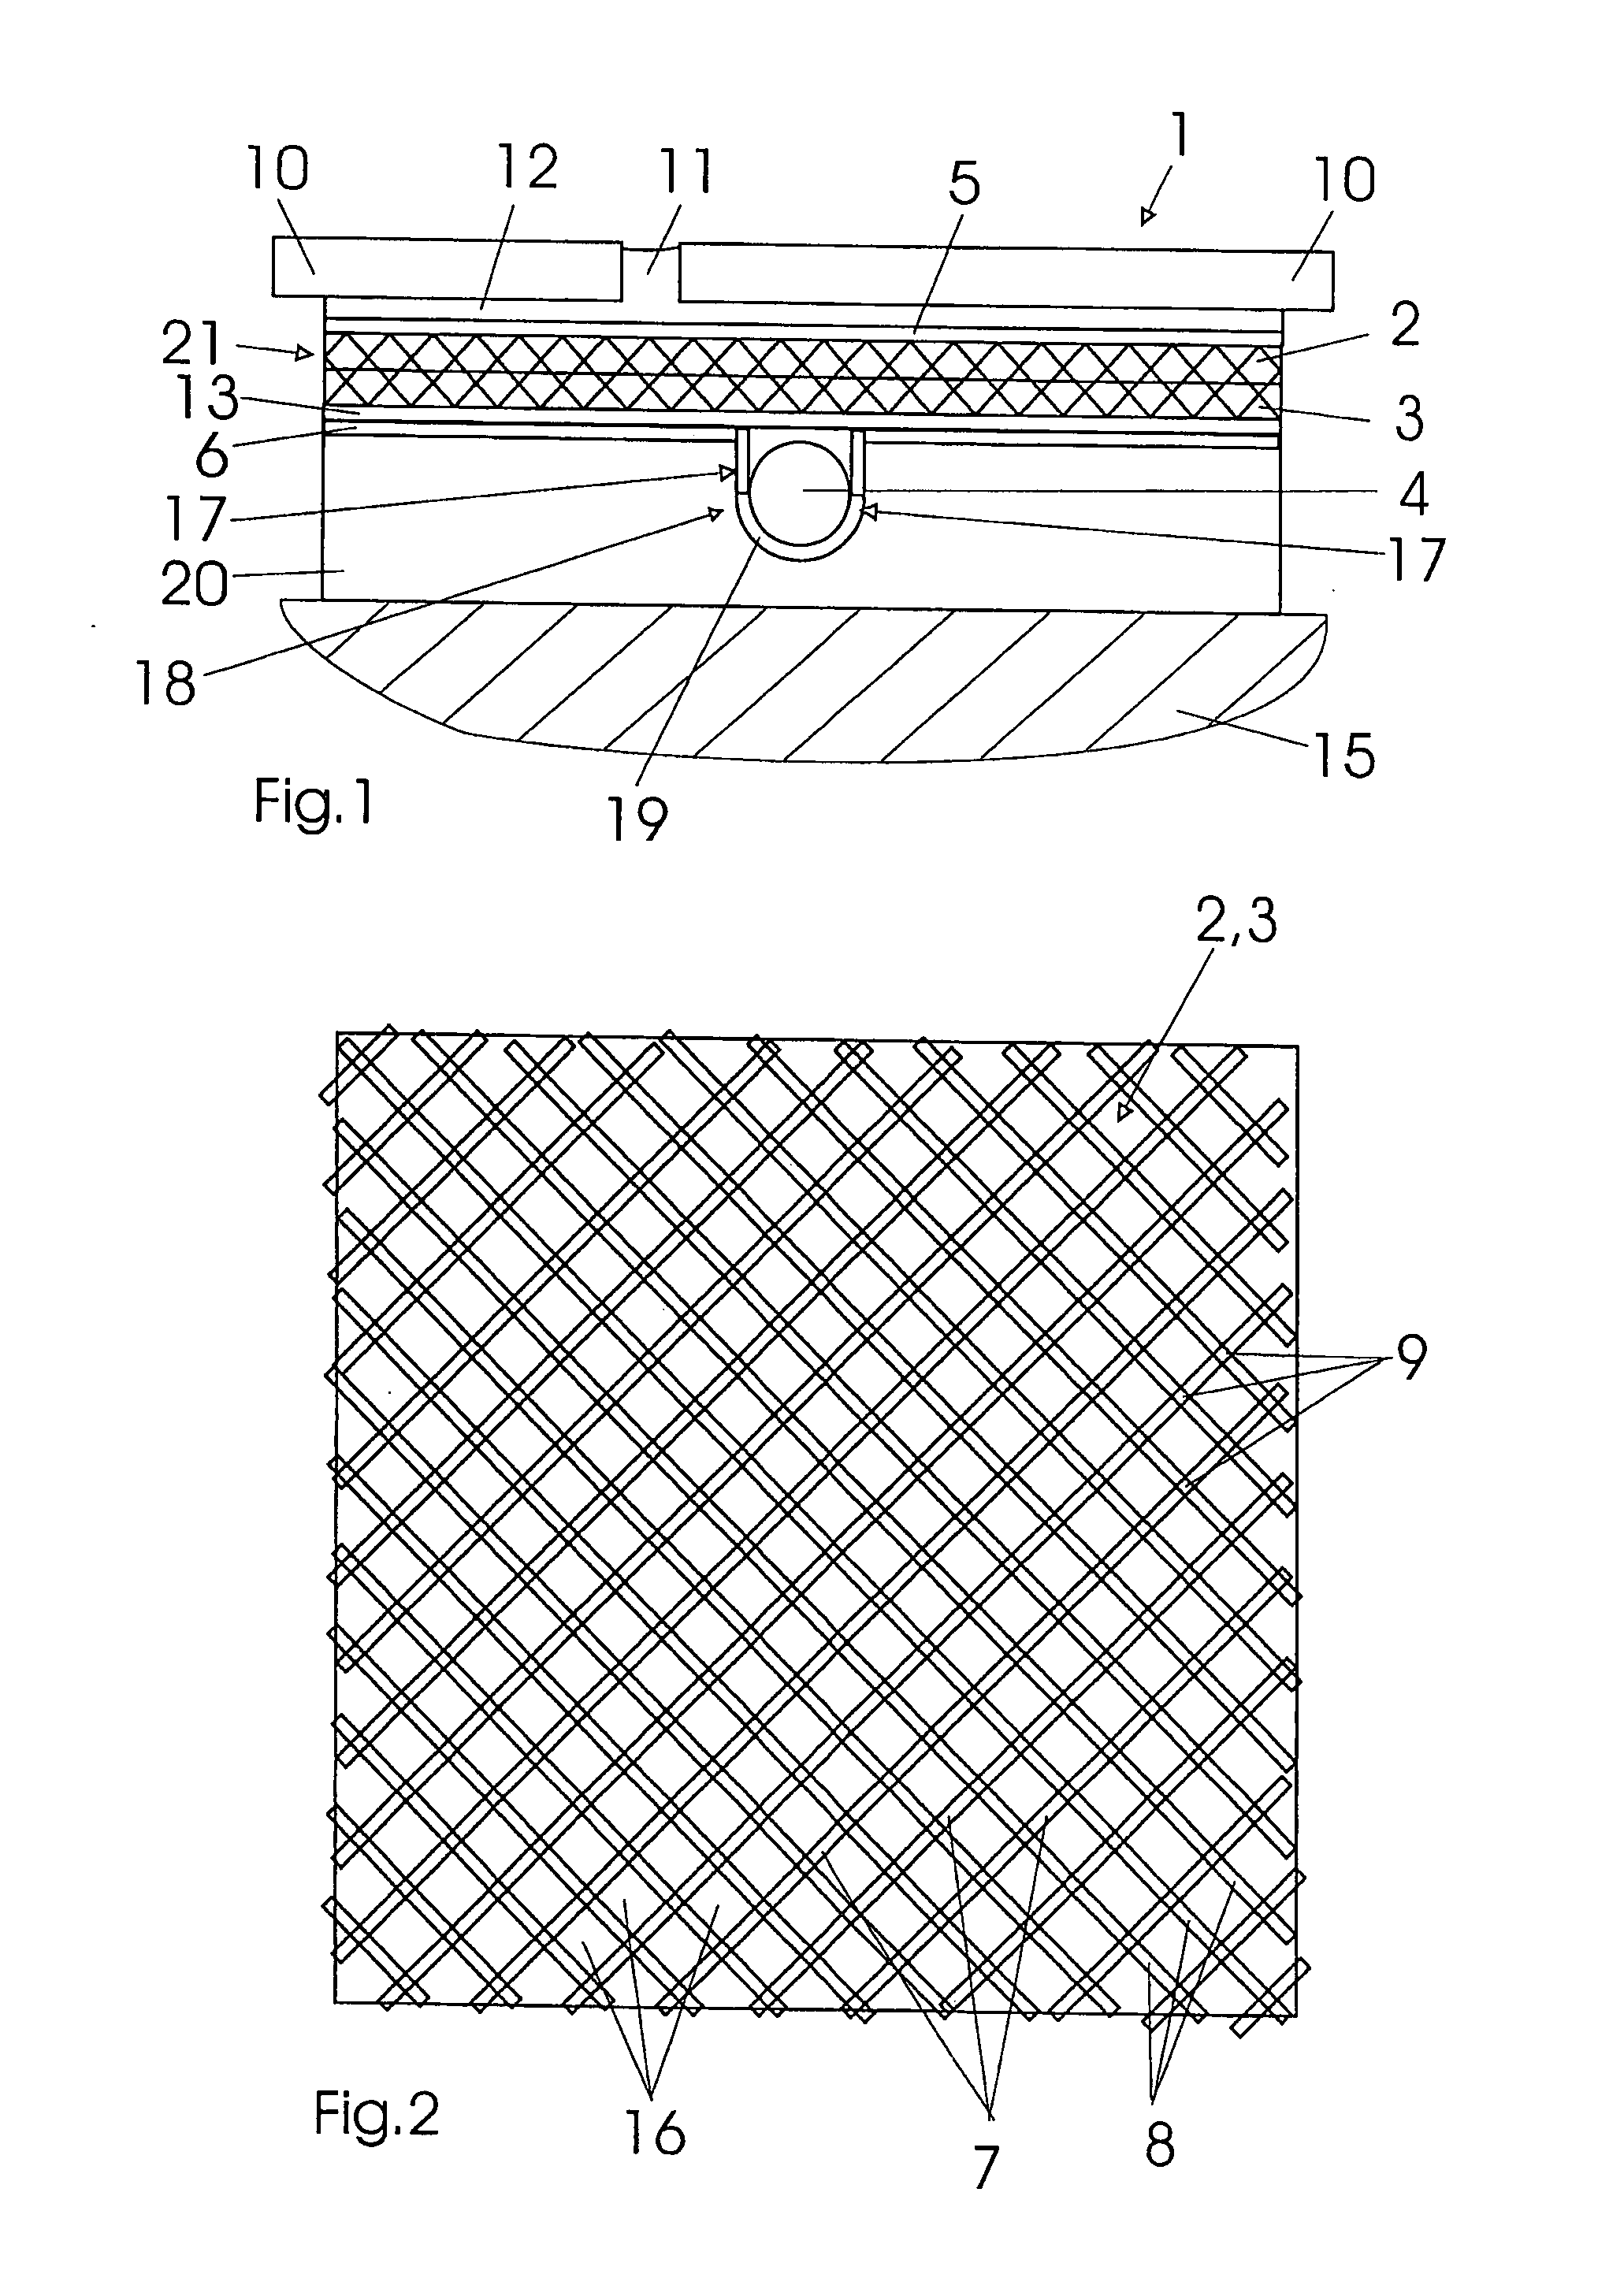 Multi-layer build-up system for floor coverings when using floor heating systems